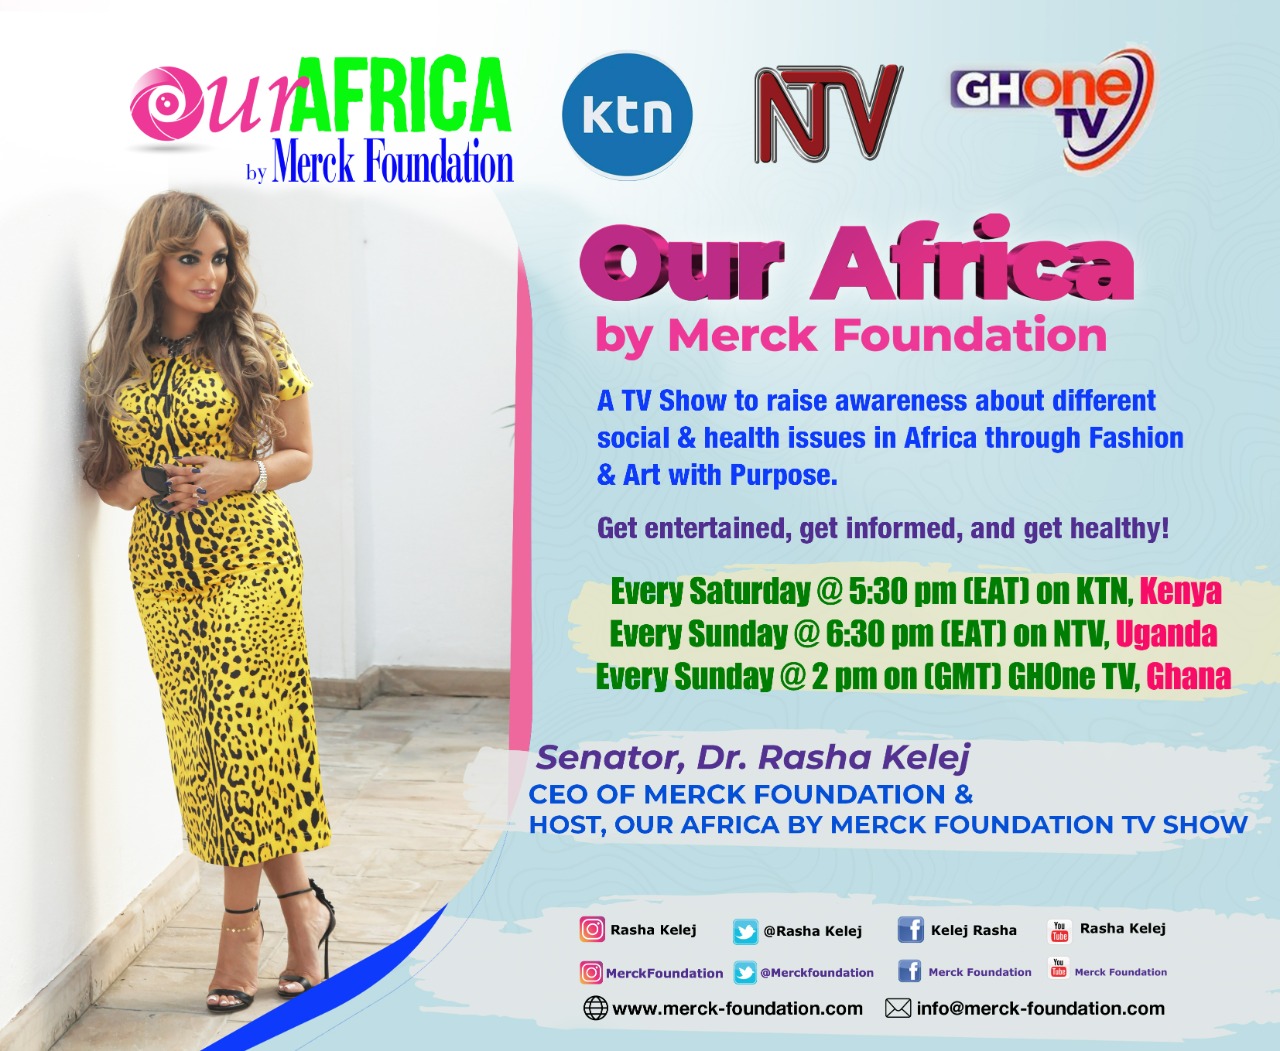 Health issues on “Our Africa by Merck Foundation” fashion, art TV